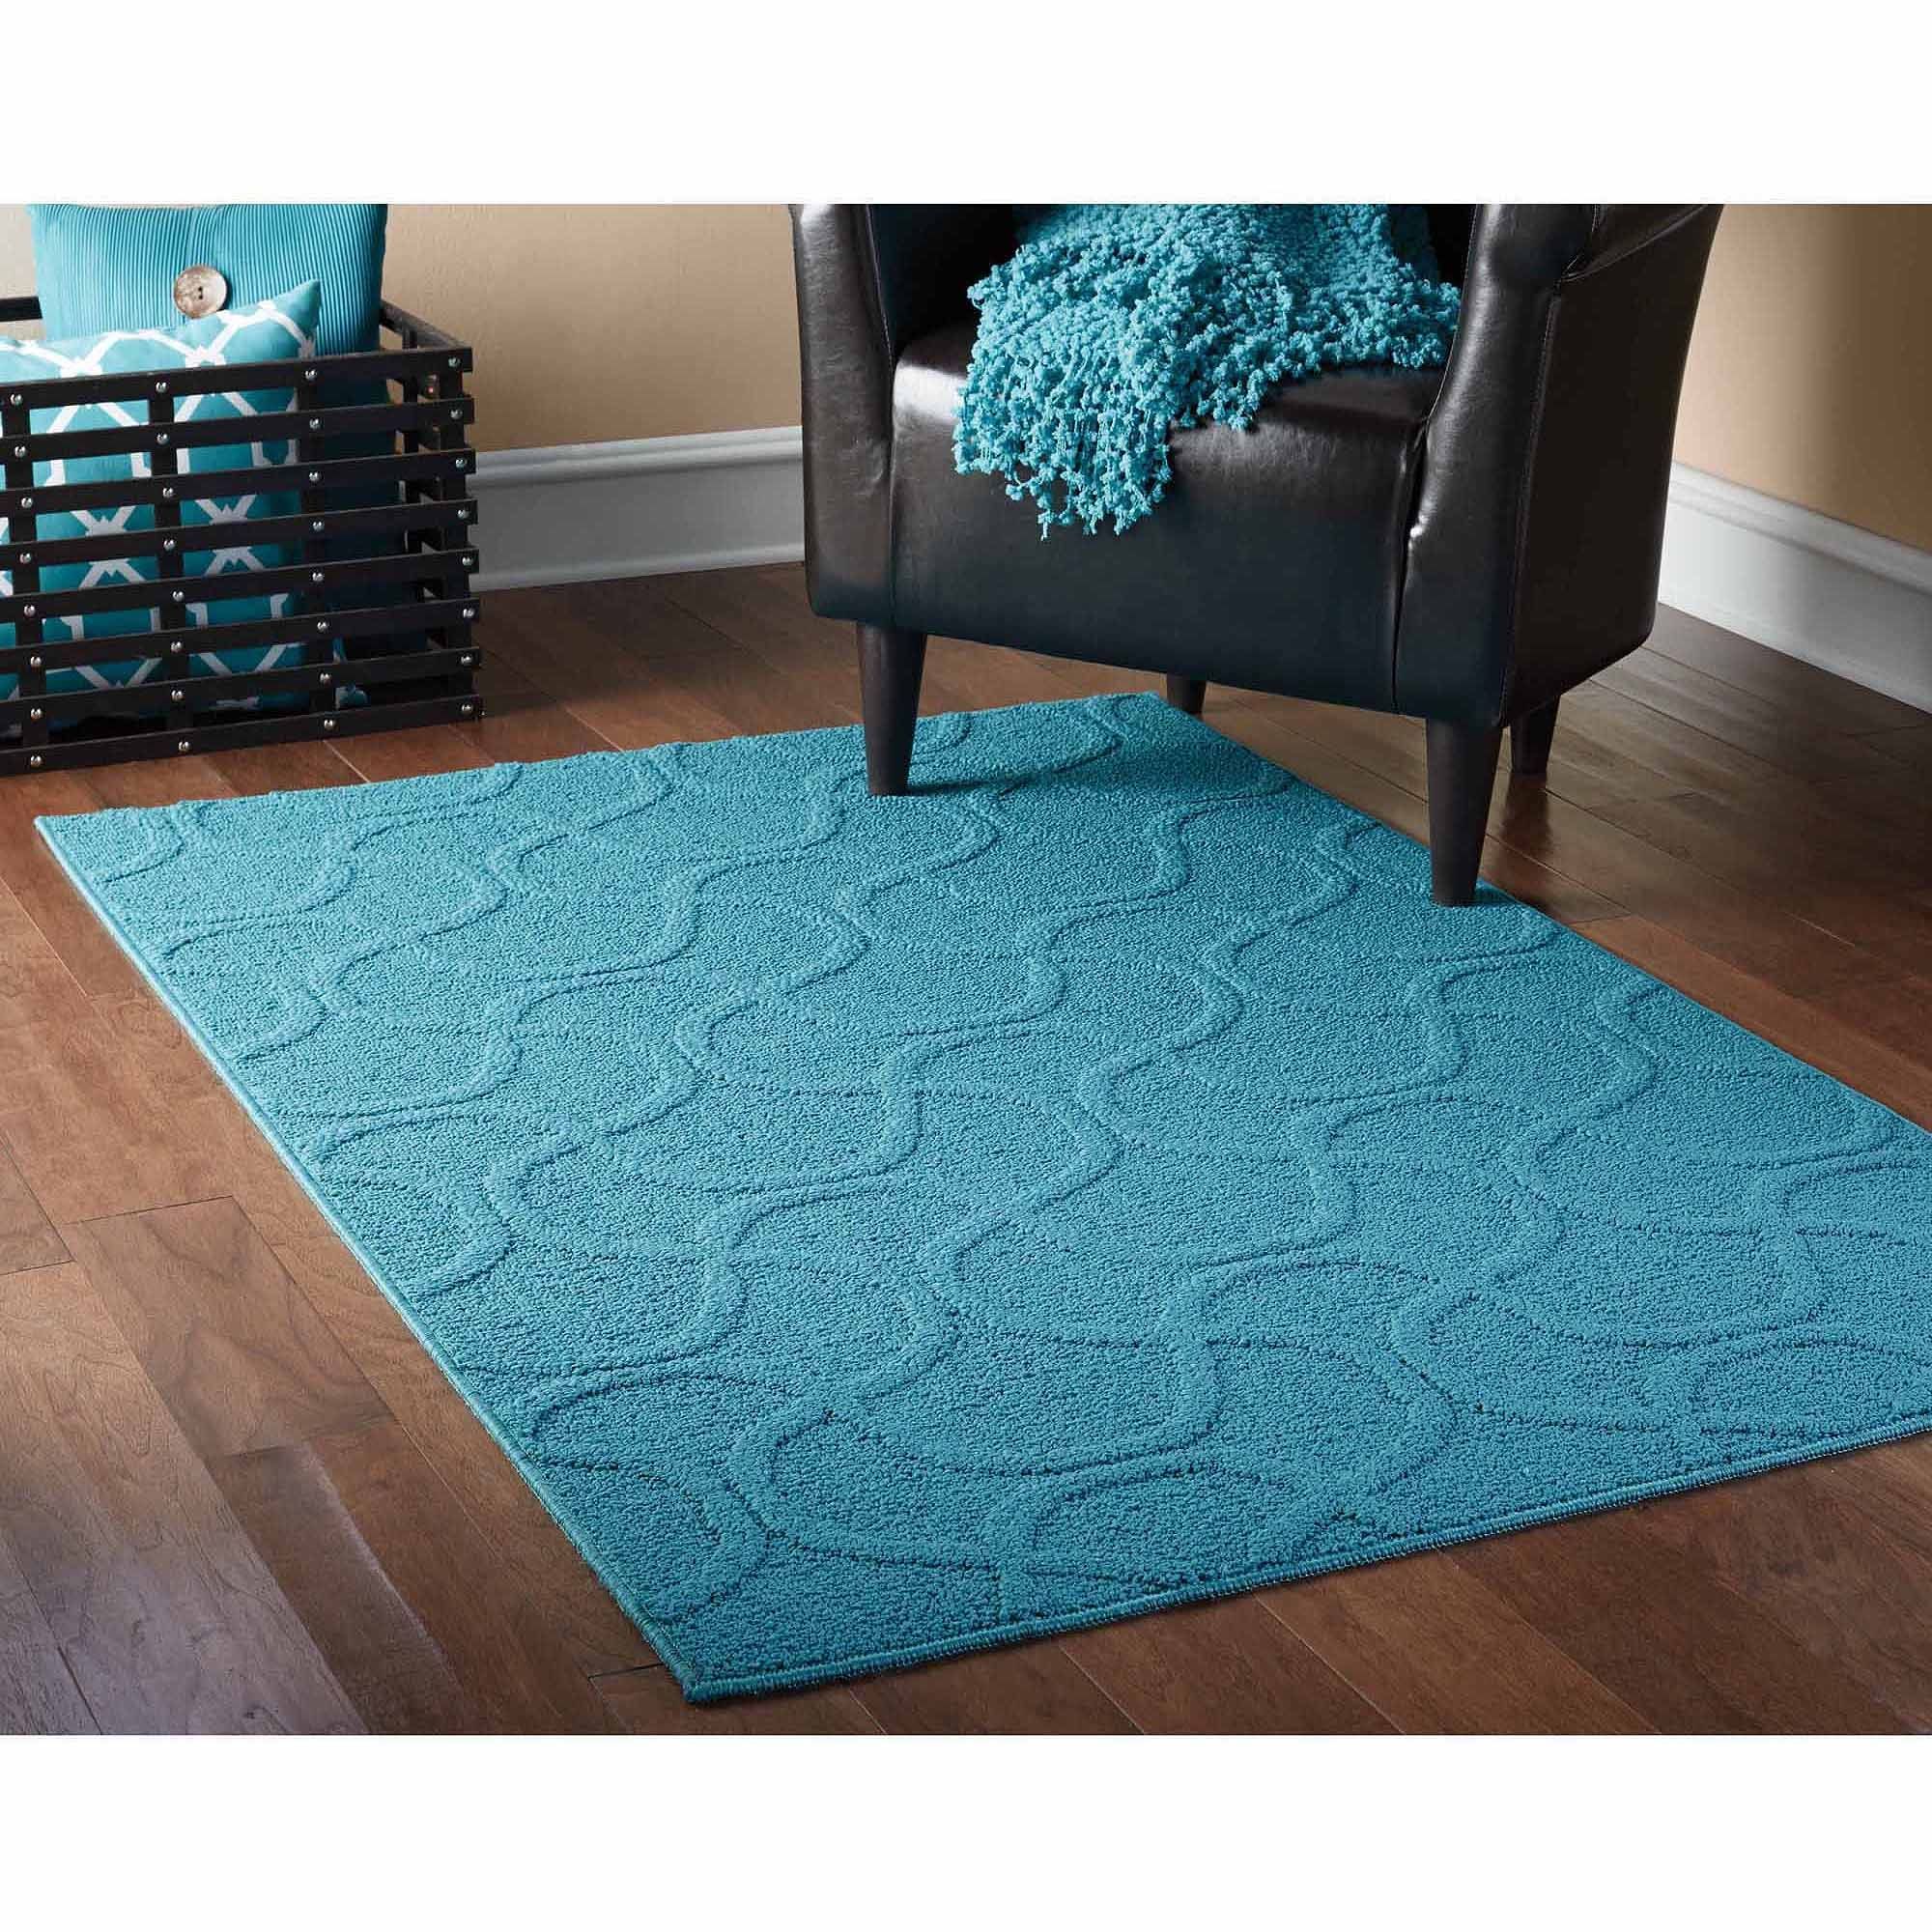 Mainstays Drizzle Area Rug Teal Walmart Throughout Hallway Runners At Walmart (View 19 of 20)